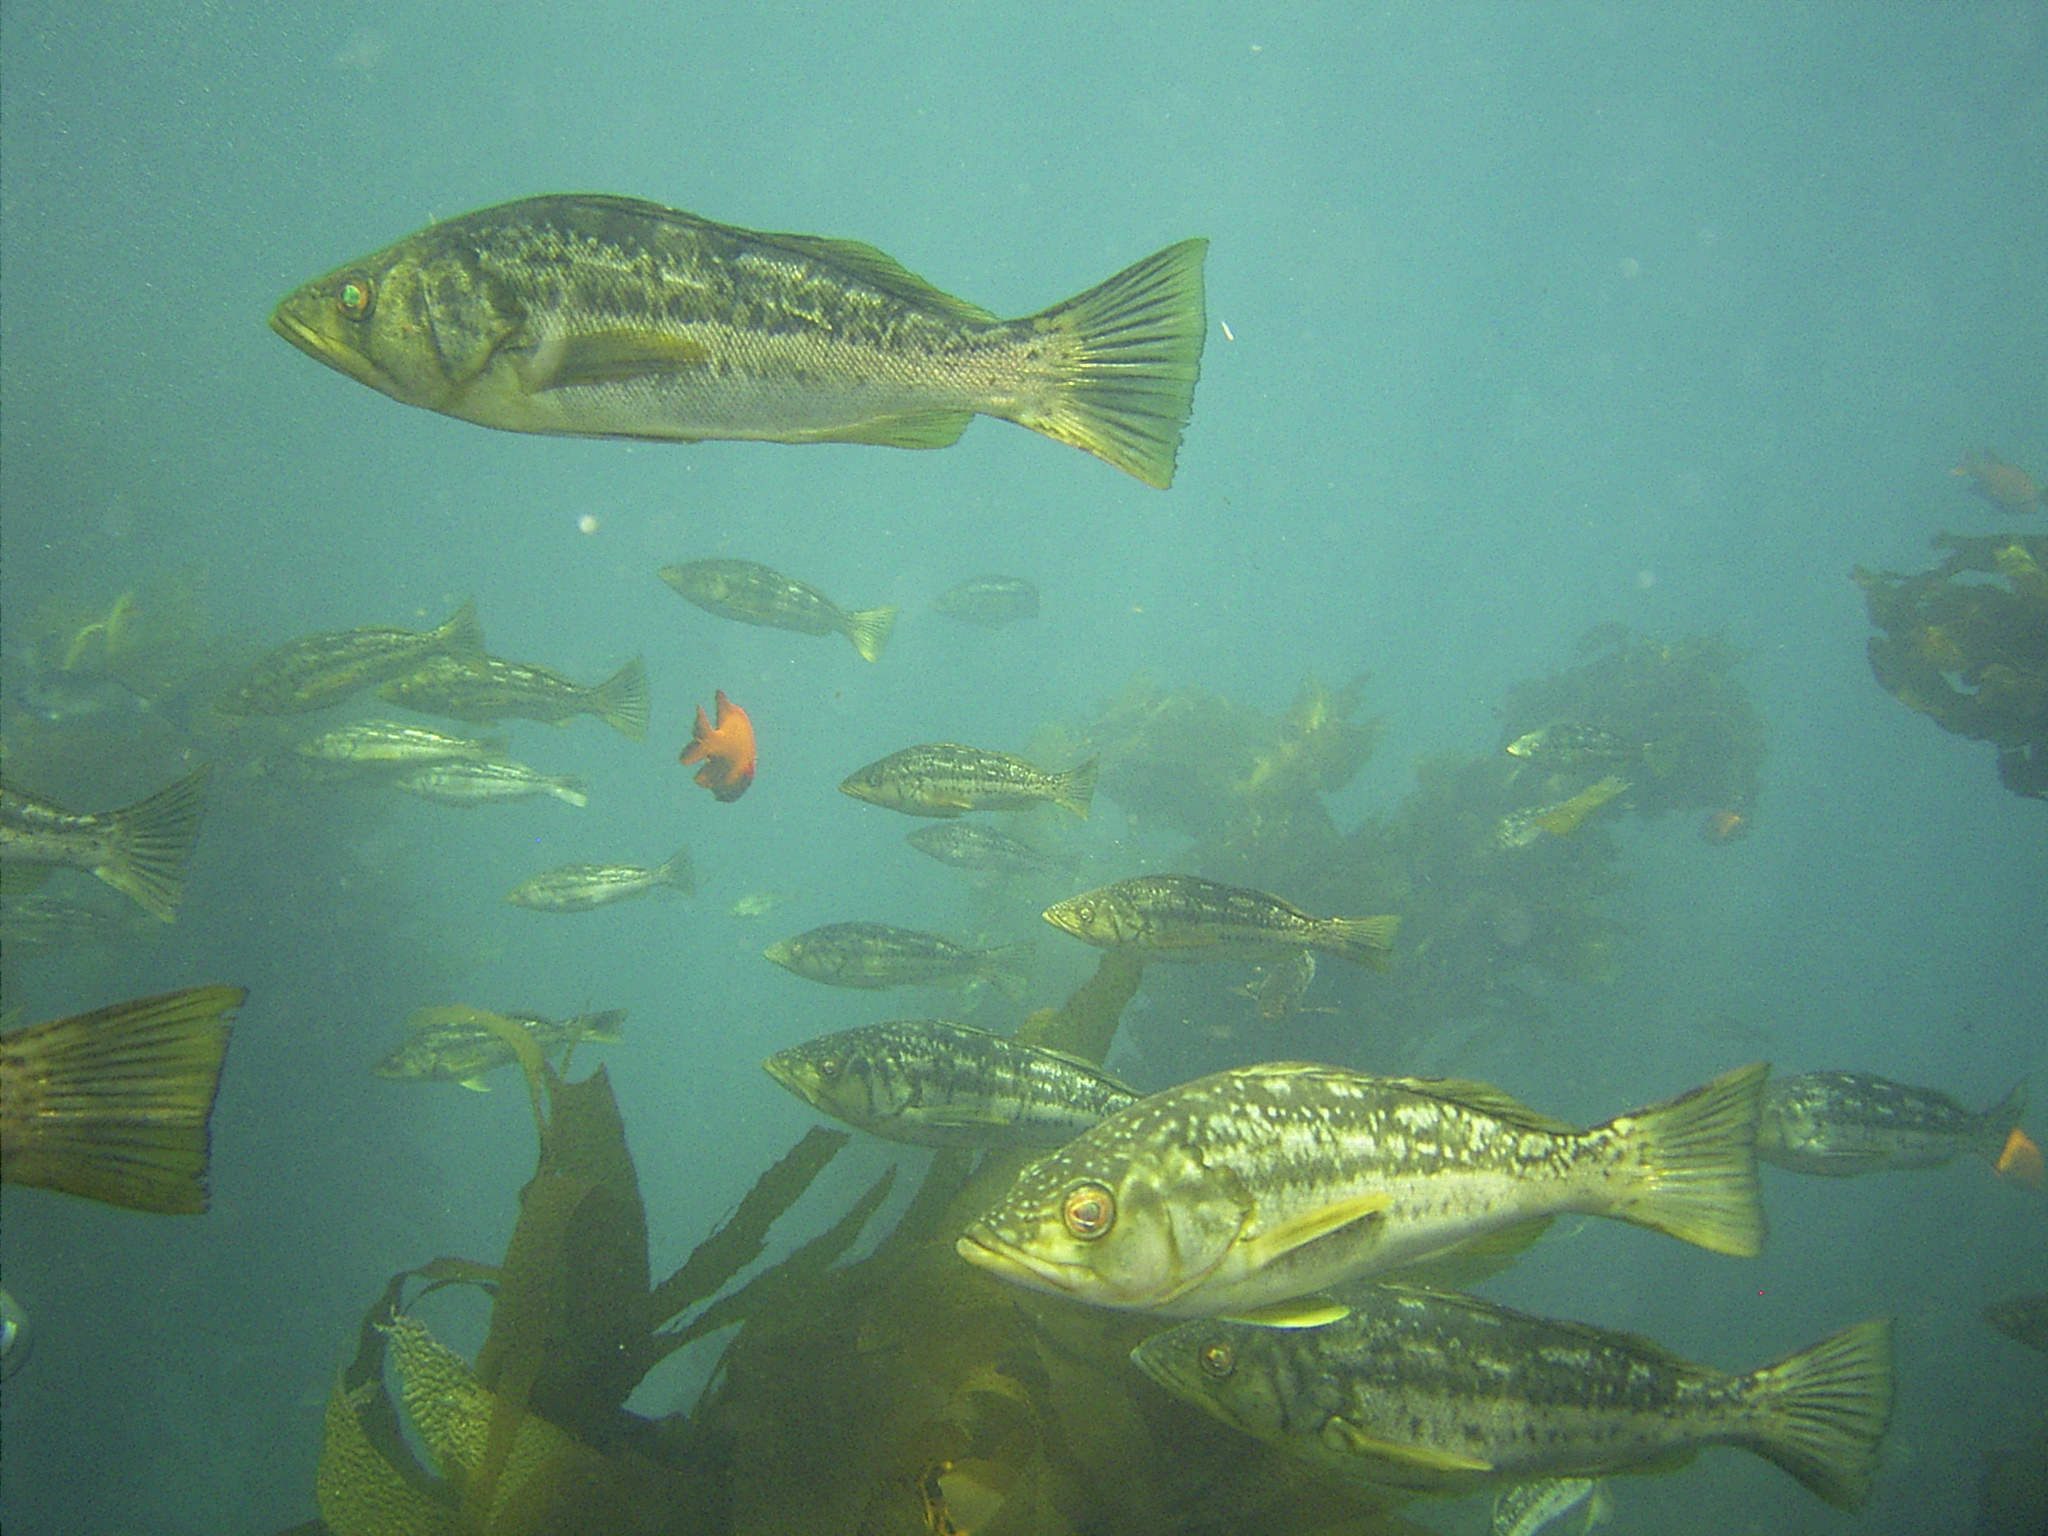 Fish seen at Catalina Island whilst working as a scuba instructor